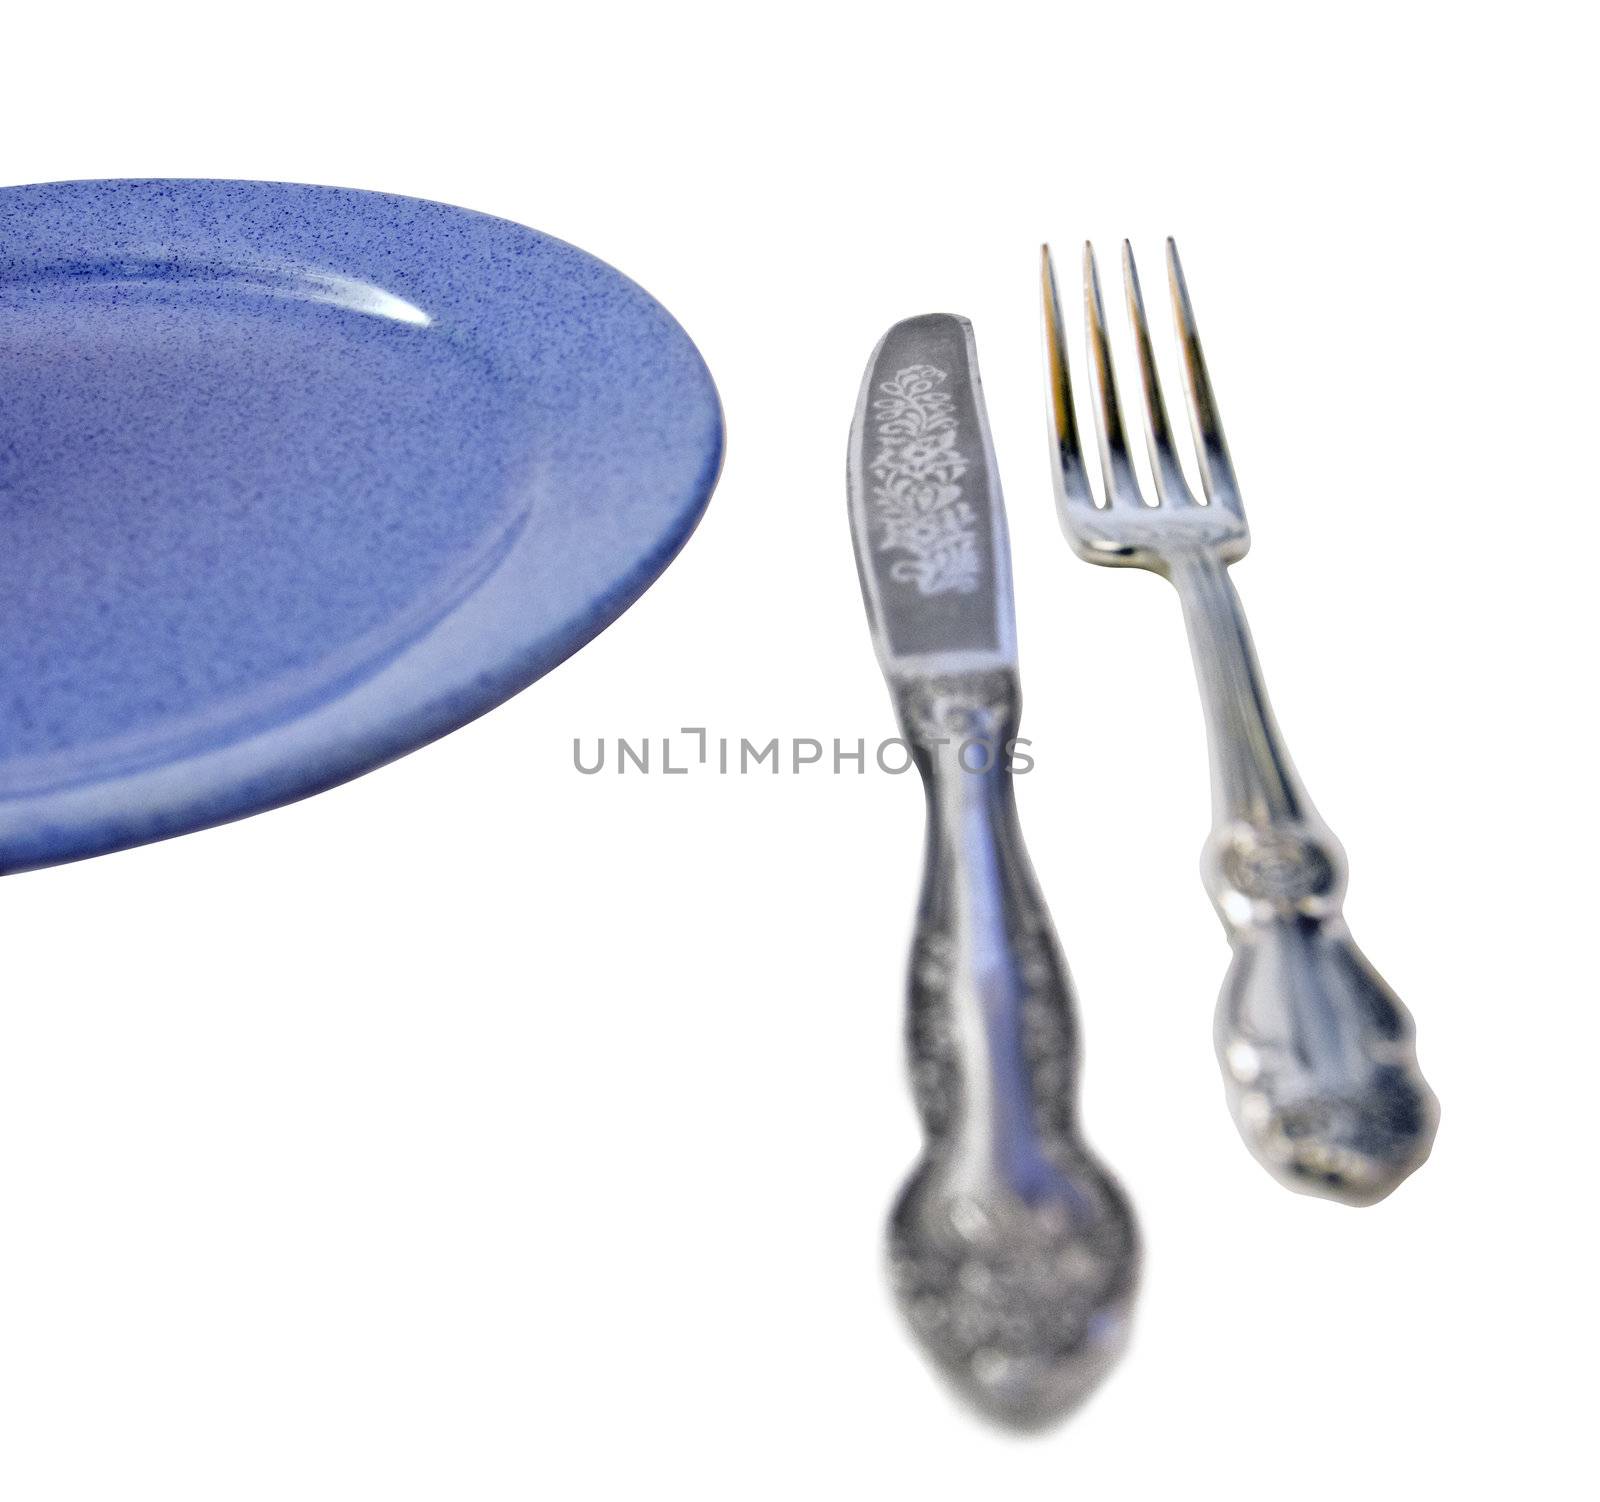 knife fork and blue plate by Qod